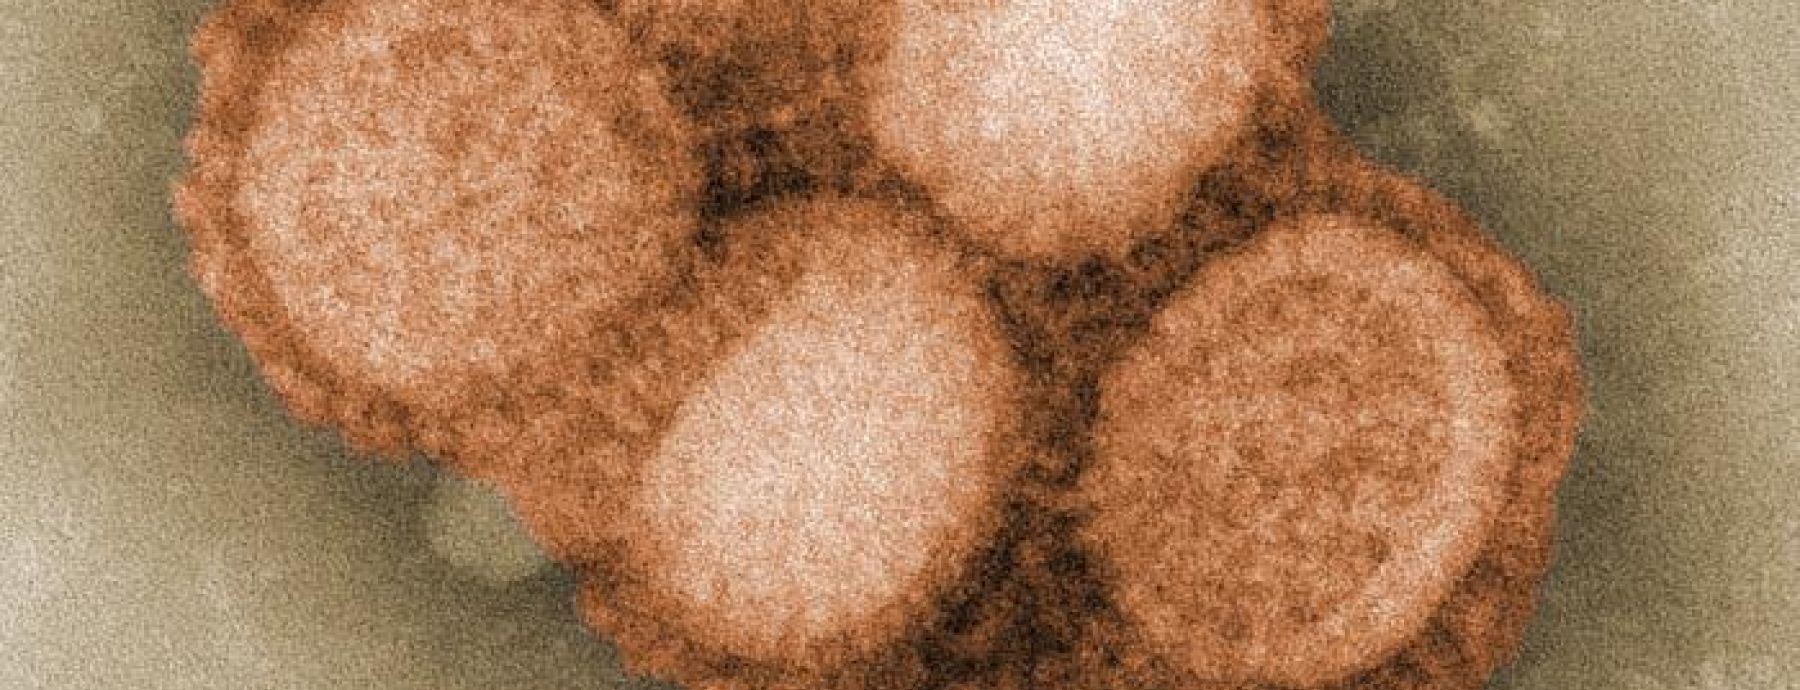 High rate of influenza virus introductions drive disease dynamics on a college campus